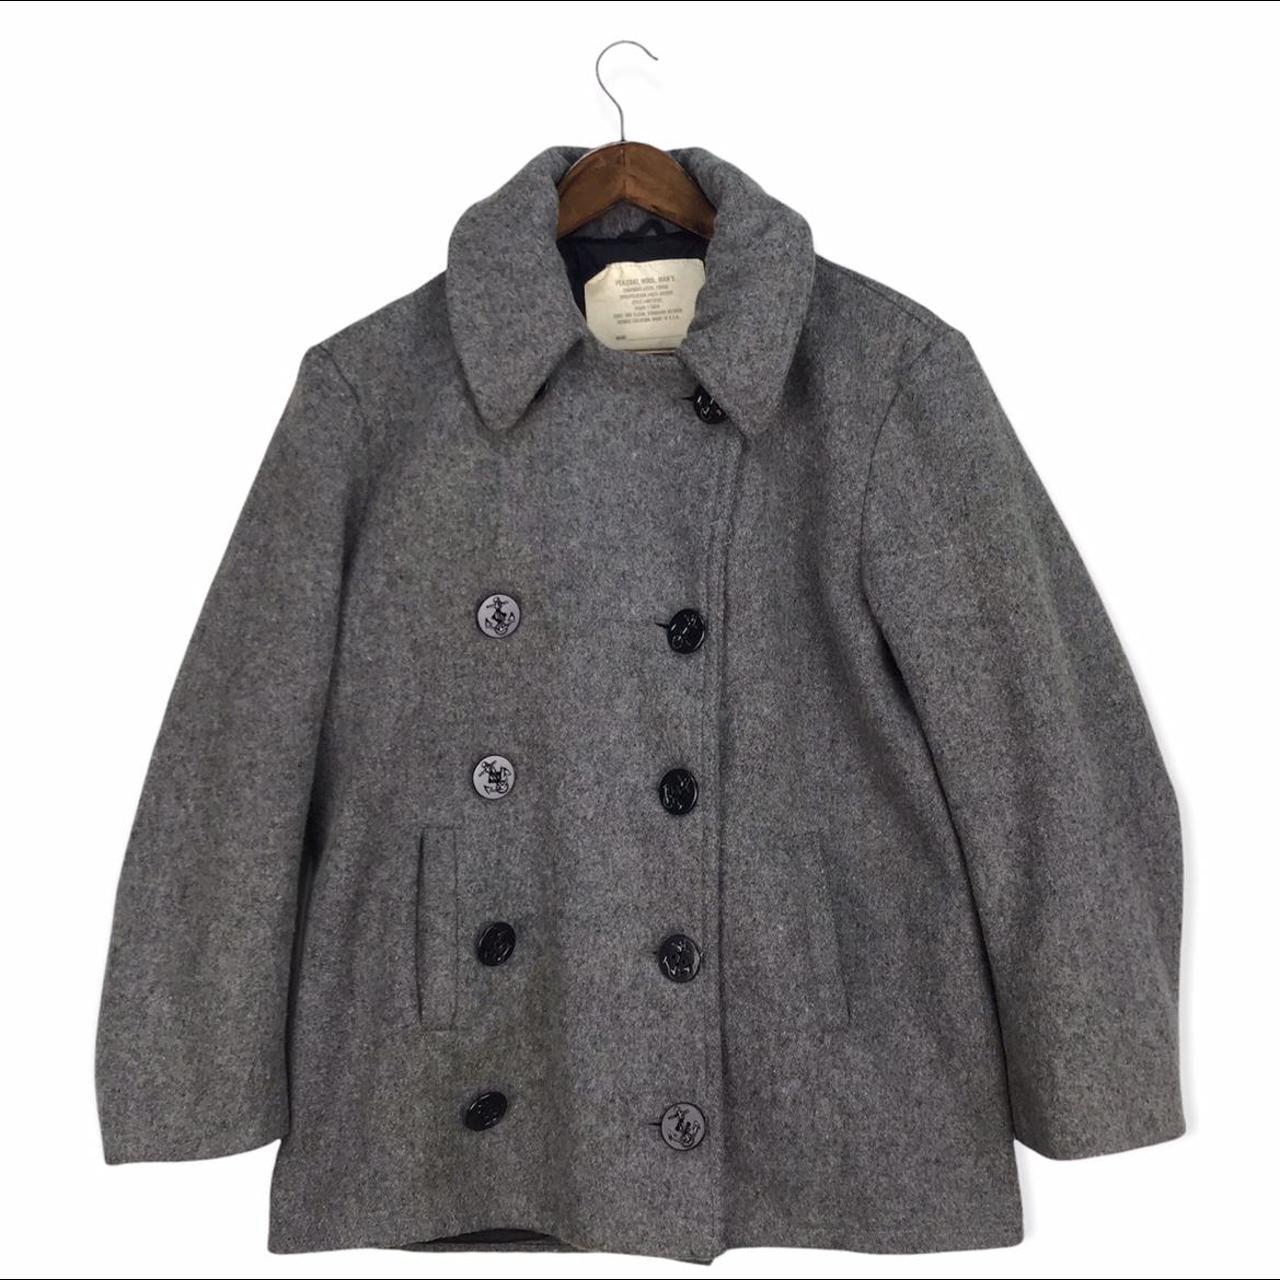 Vintage WOOL PEA COAT MILITARY COLD WEATHER #usa... - Depop